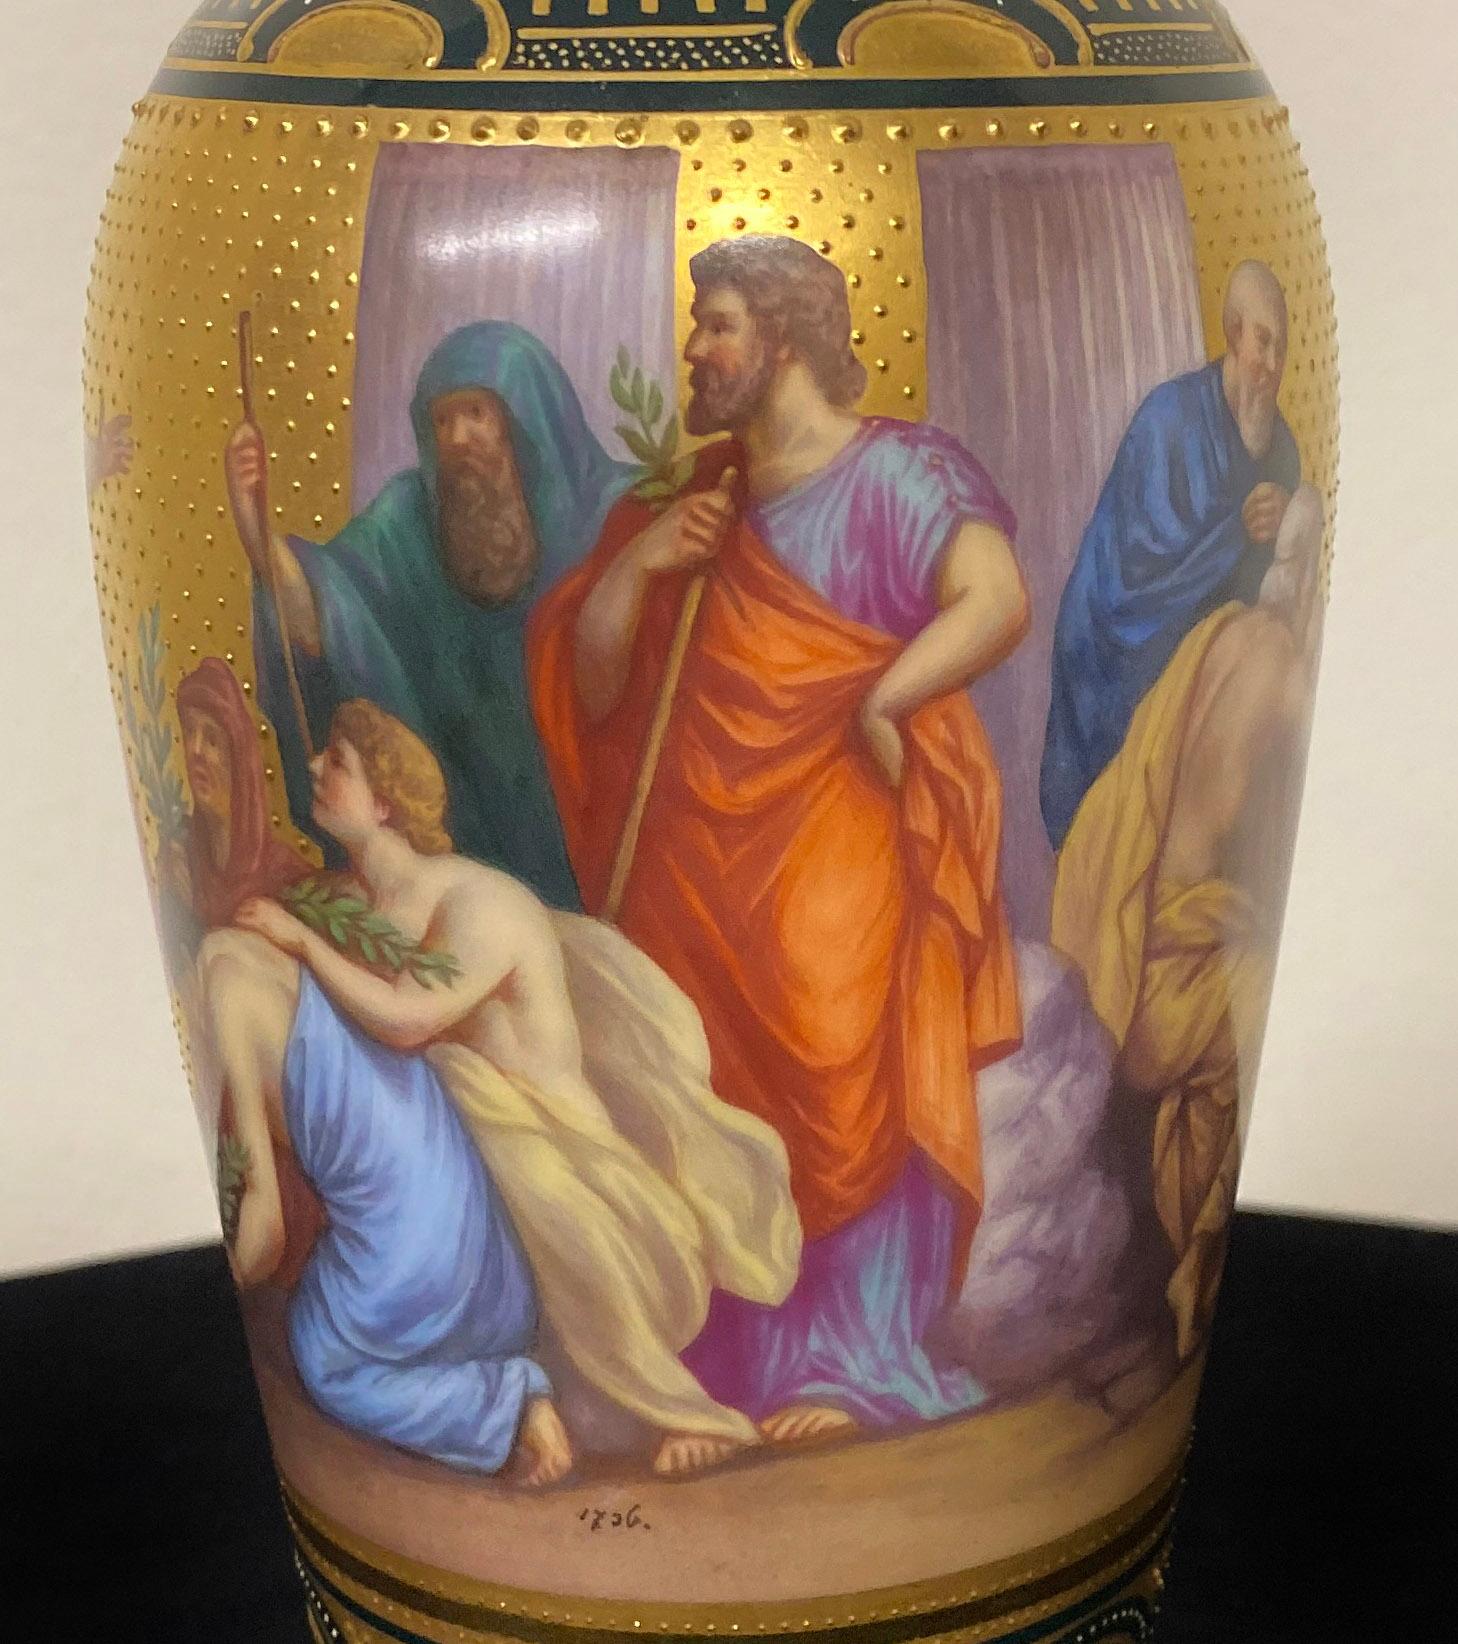 Beautiful late 19th century Royal Vienna porcelain vase and cover depicting Apollo

The greenish vase with painted with figures of Apollo surrounded by many of his followers, raised gold designs along the top and bottom.

Signed by the artist